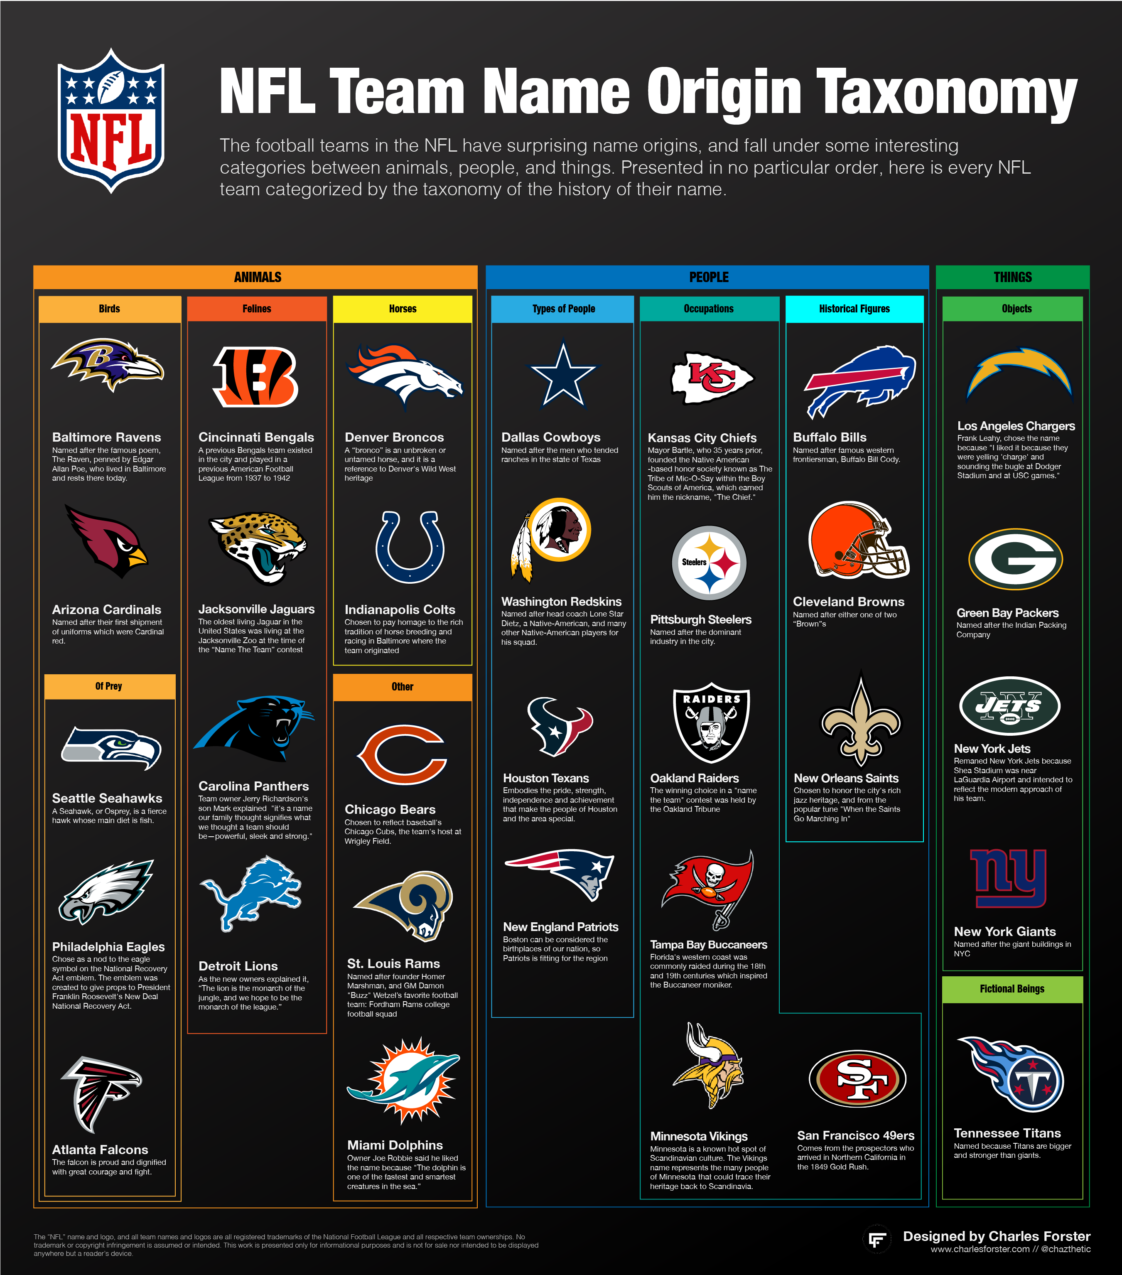 Infographic Taxonomy of NFL teams based on their name origins